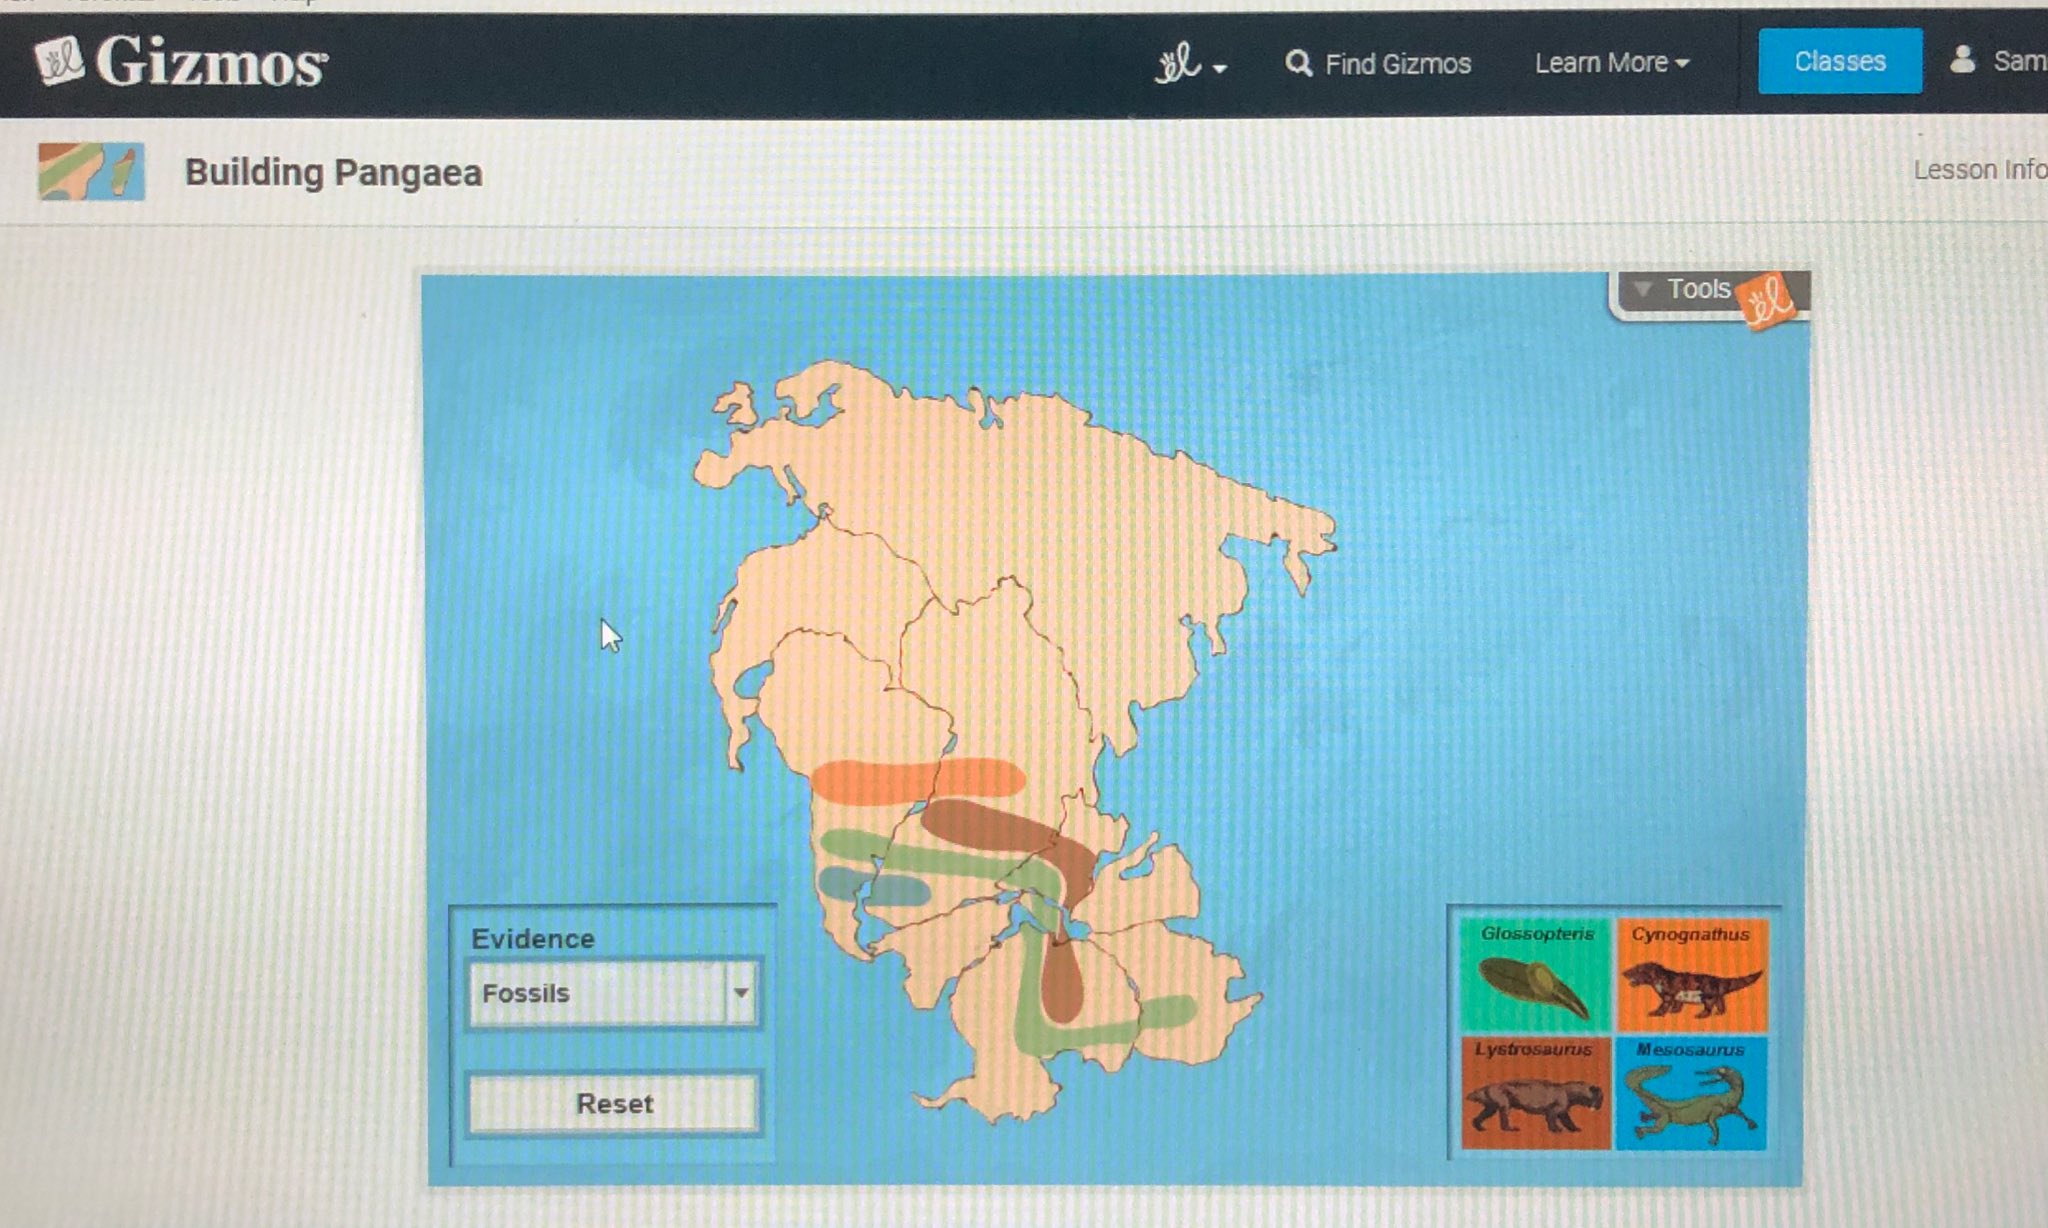 Shobica Wadhwa On Twitter It Was A Fun Challenge For Students To Build The Super Continent Pangaea On Explorelearning Today Platetectonics Continents As Puzzles Https T Co 1pvw6vgvzk